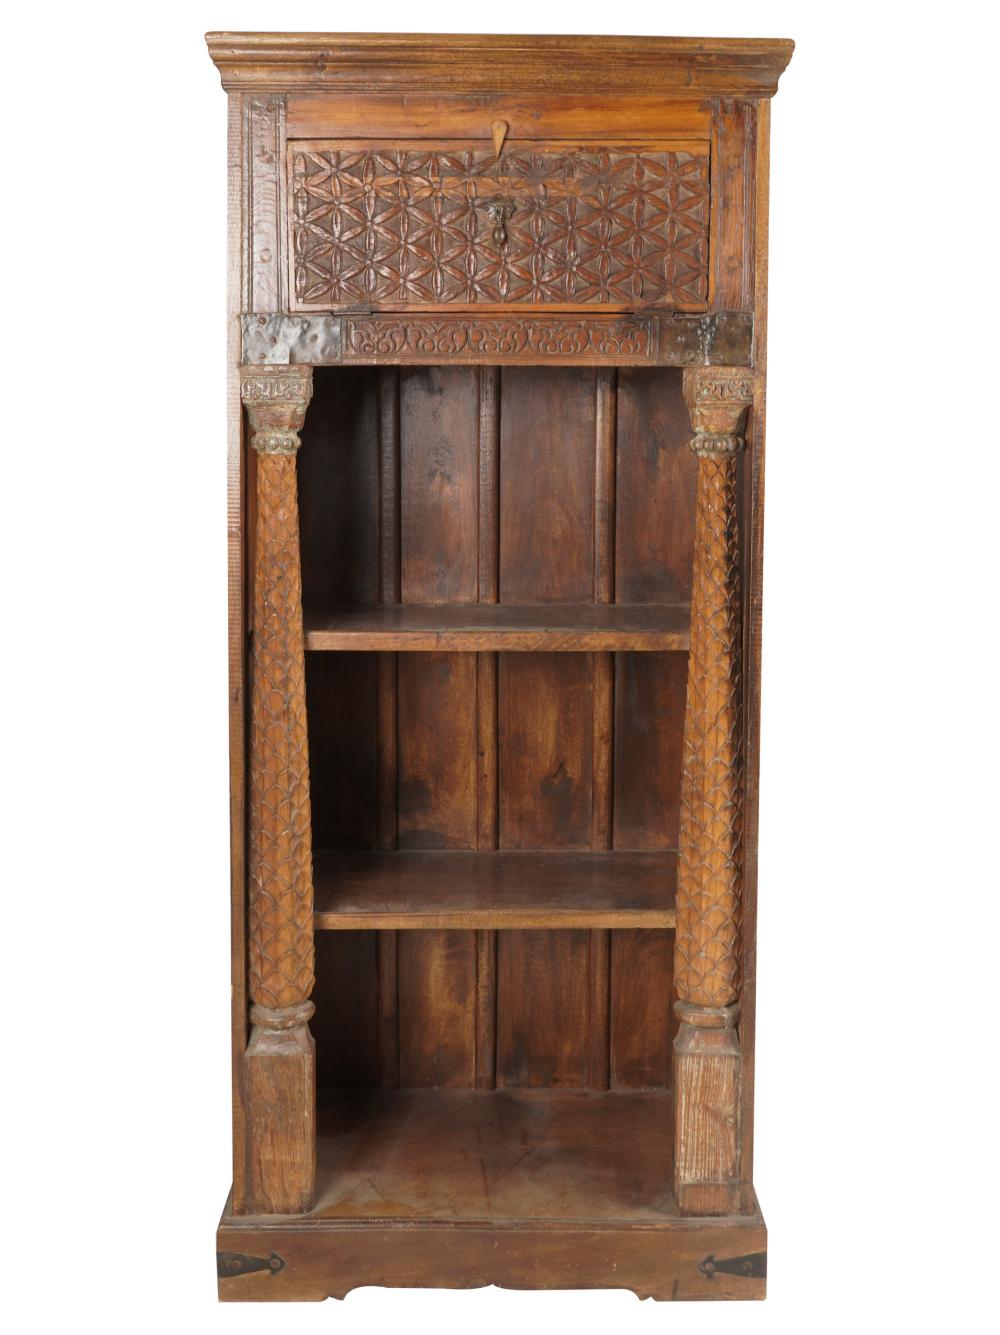 RUSTIC CARVED WOOD CABINETwith 331a8a